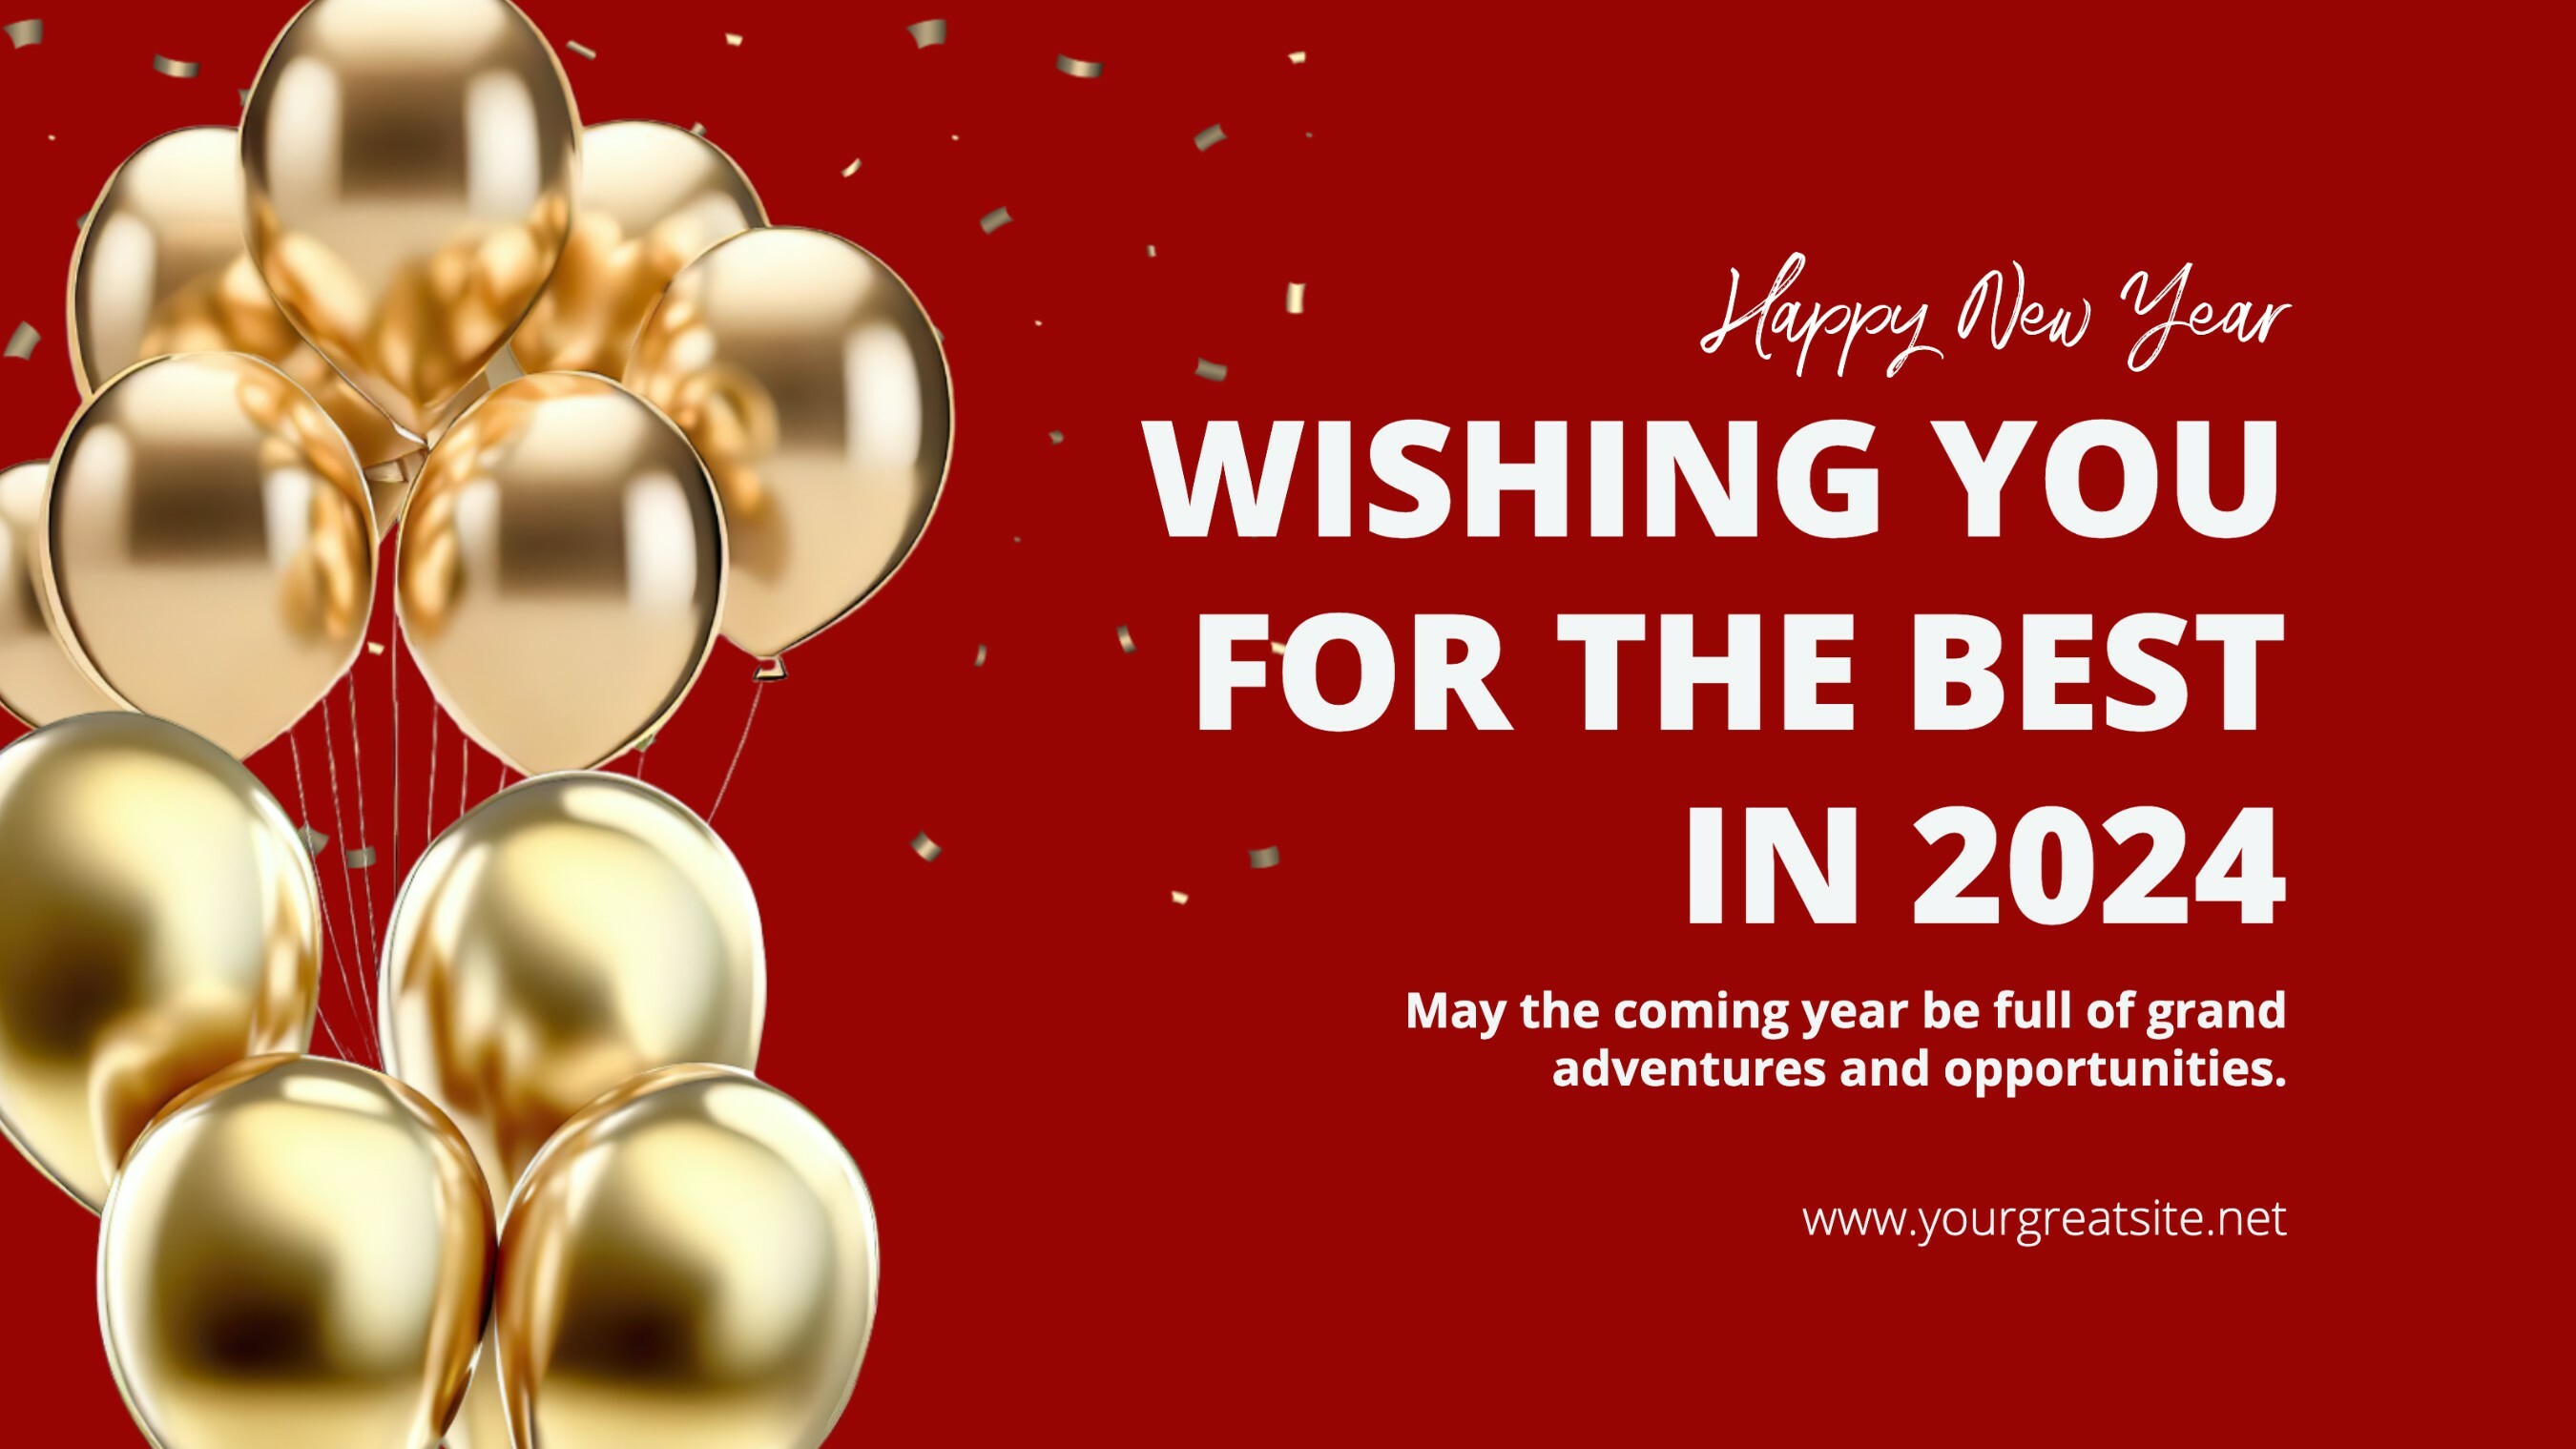 New year greeting in red and gold balloon twitter post social media template design ideas